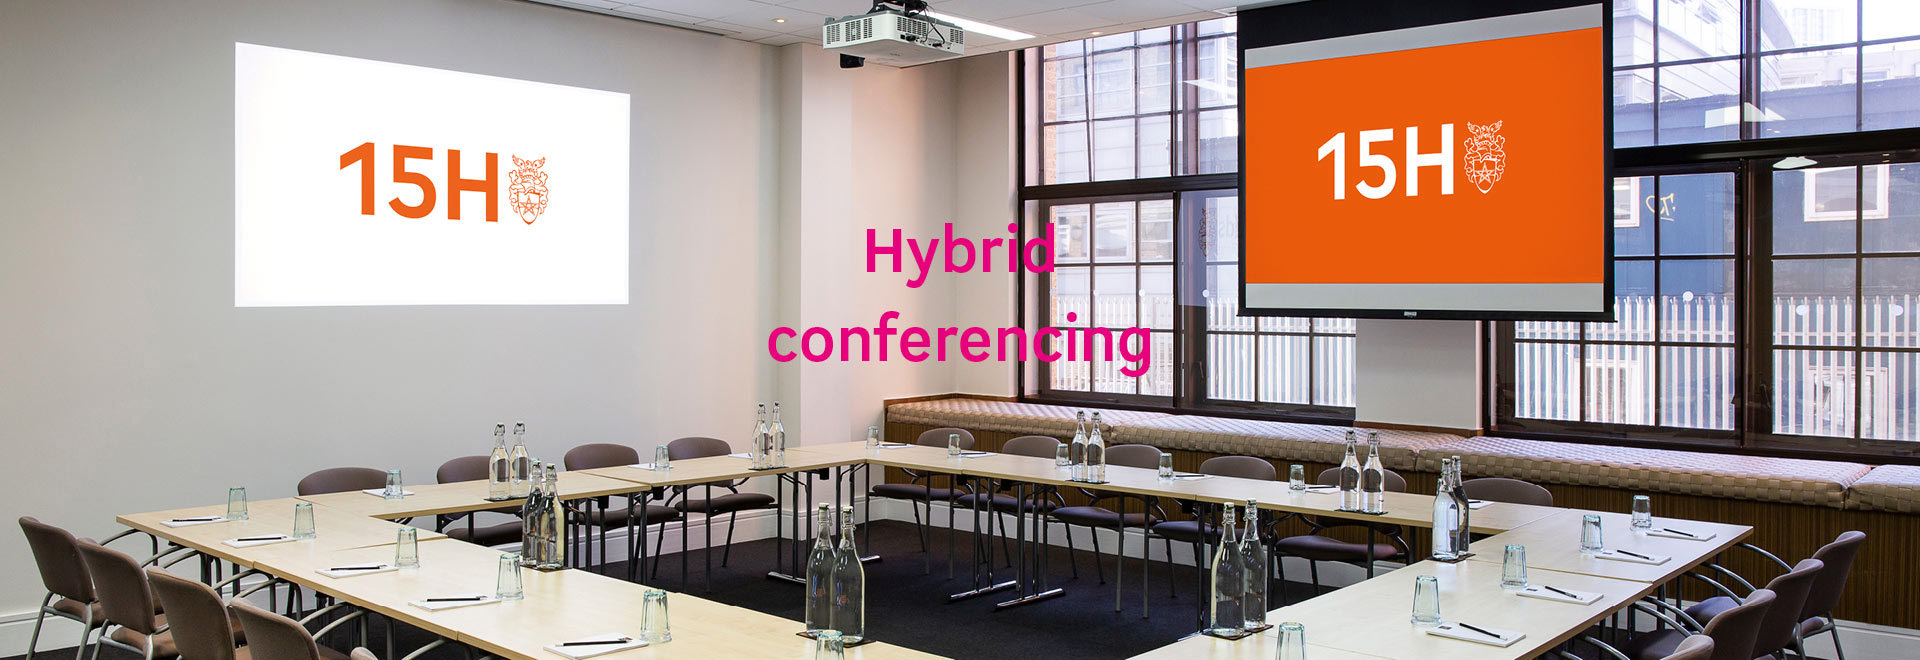 15Hatfields conference room with boardroom seating and the words 'Hybrid conferencing'